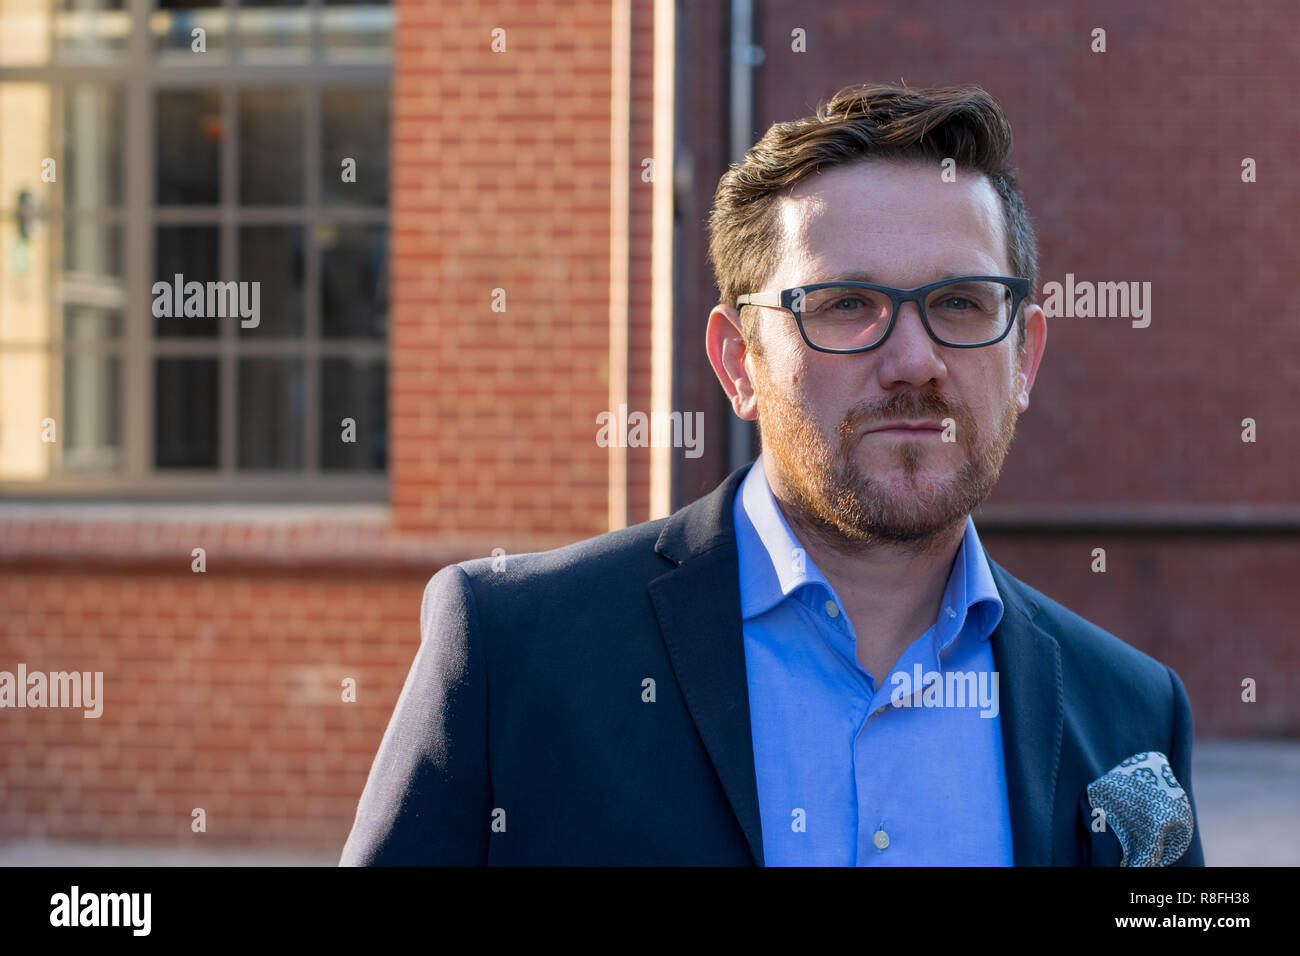 Business man with glasses outside Stock Photo